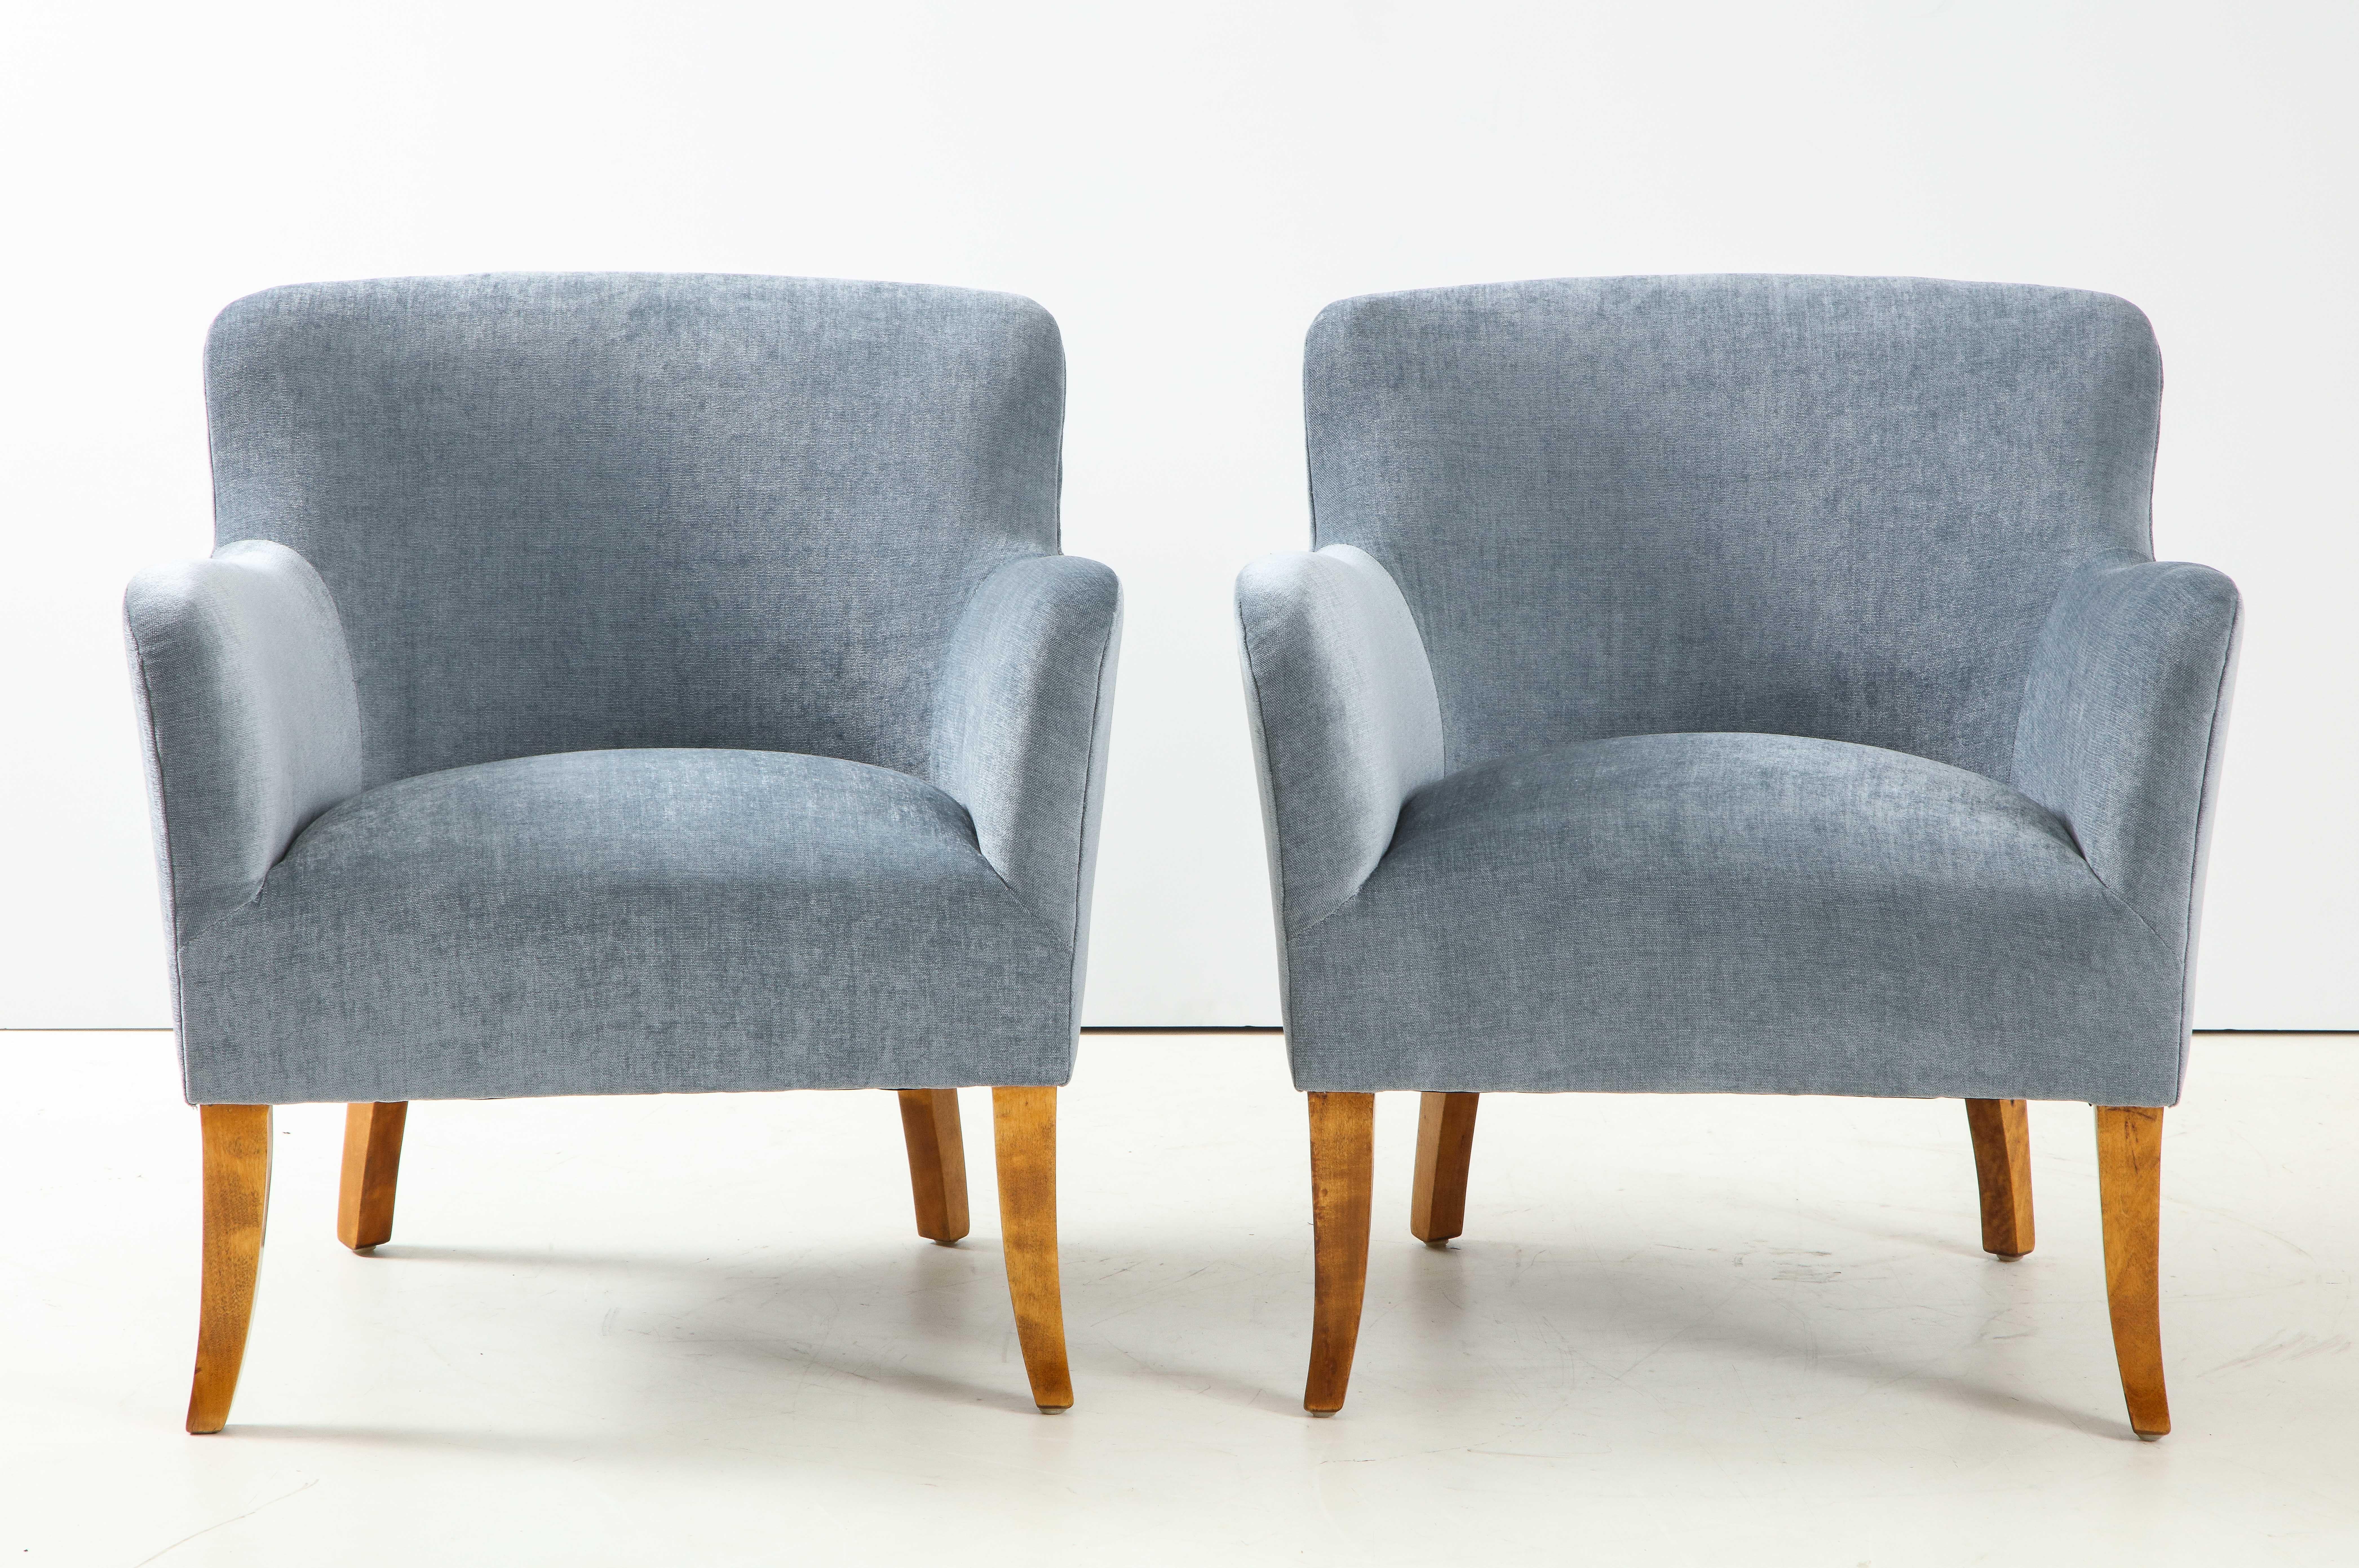 A pair of Swedish upholstered club chairs, circa 1940s, with rectangular and curved back, tight seat and curved armrests raised on Birchwood outplayed sabre legs.